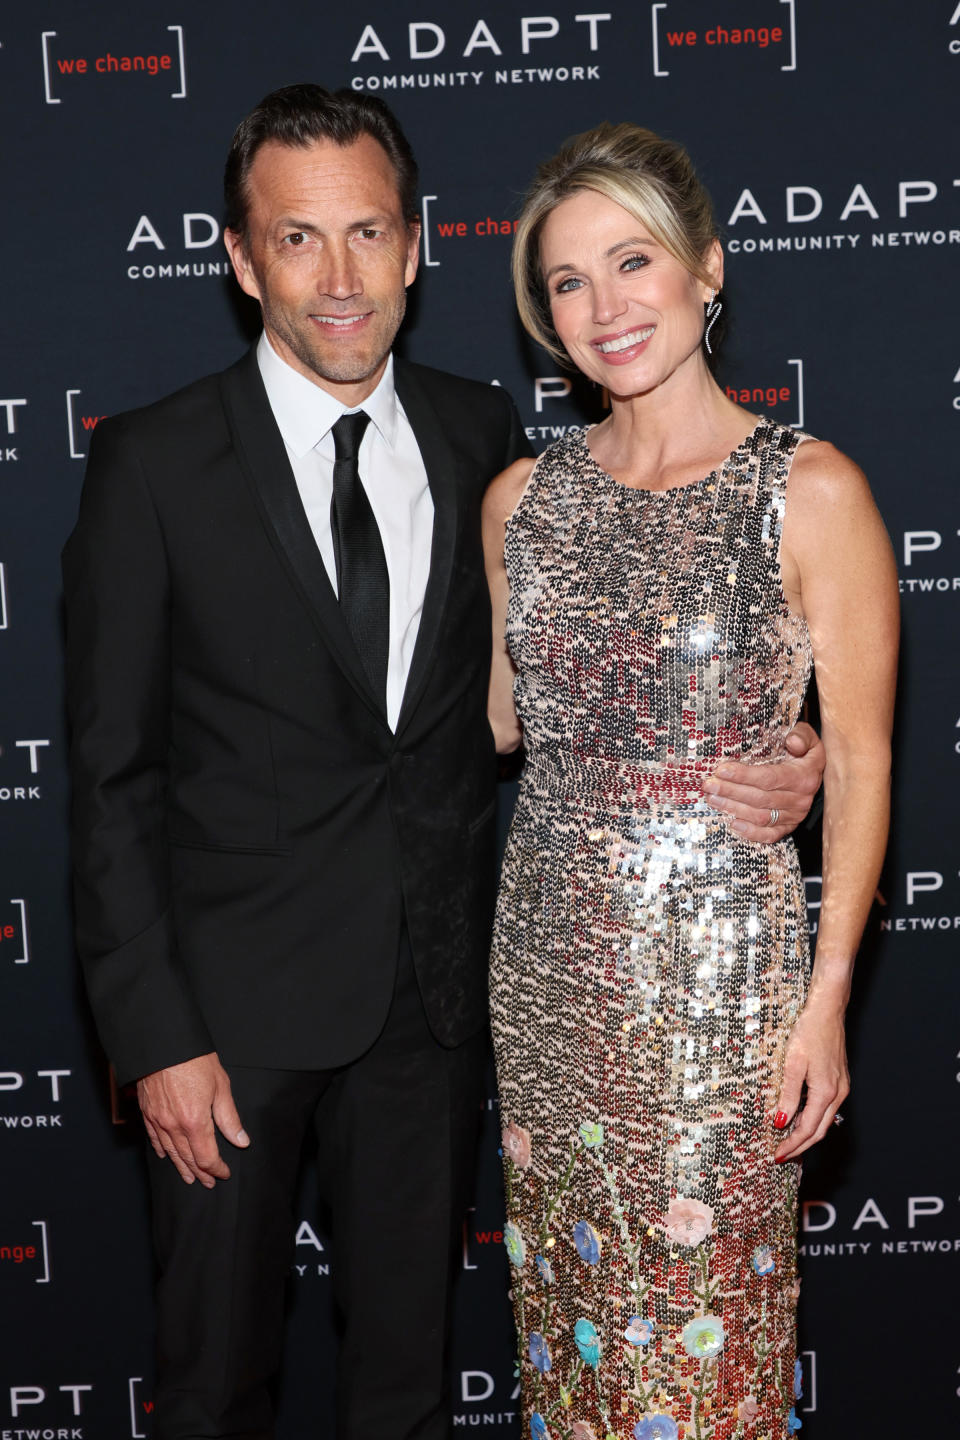 andrew shue and amy robach pose on a red carpet